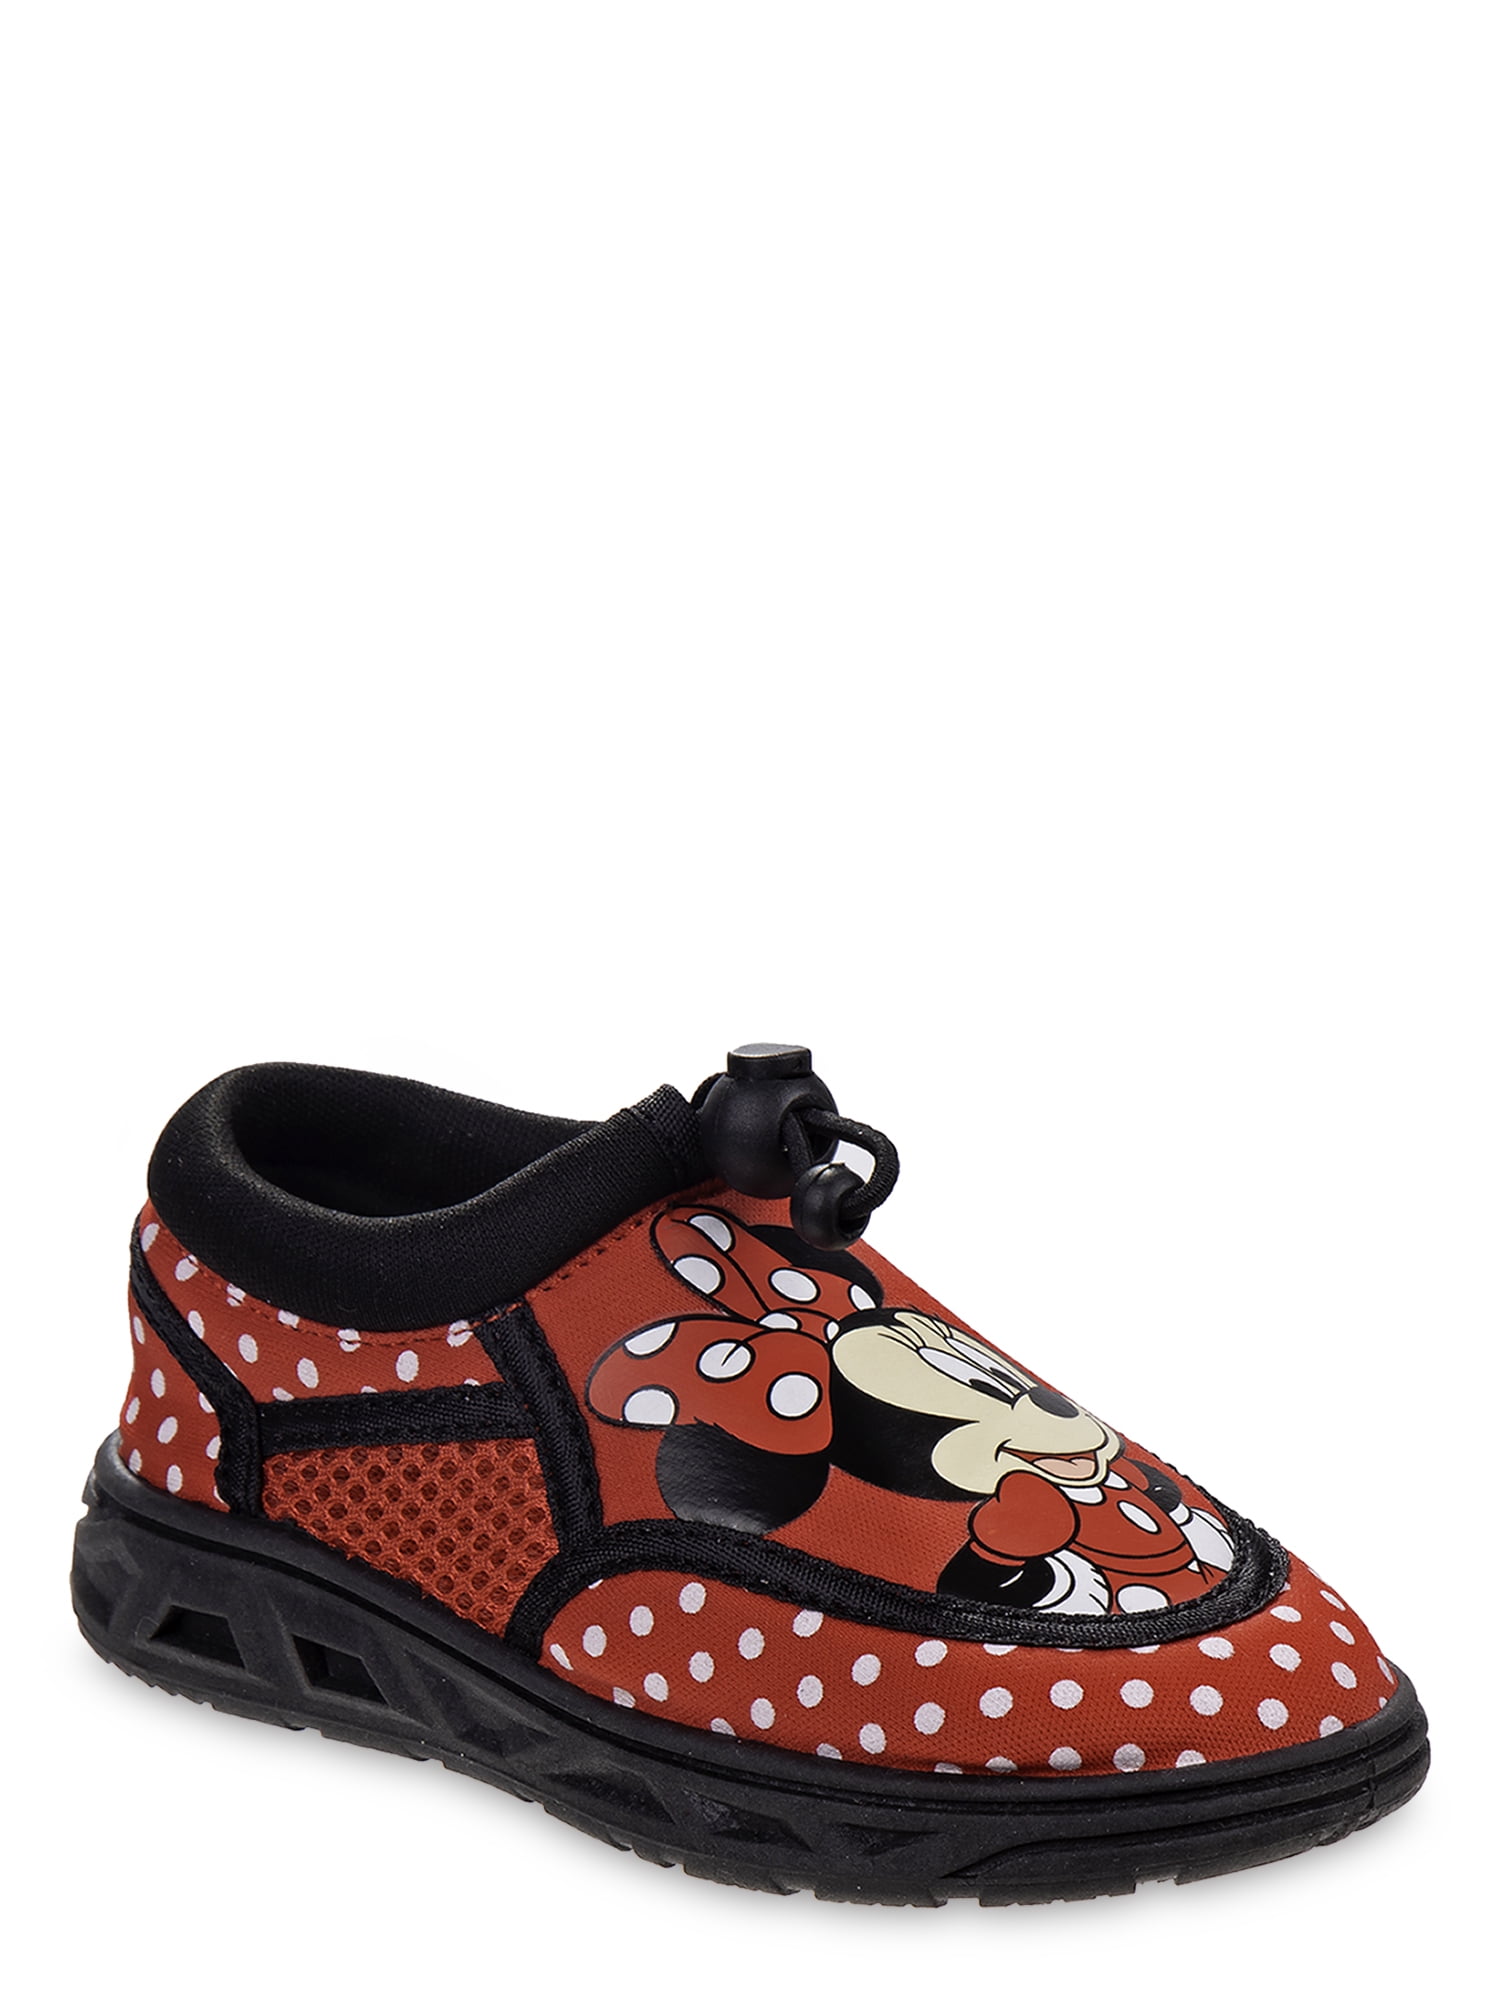 minnie water shoes